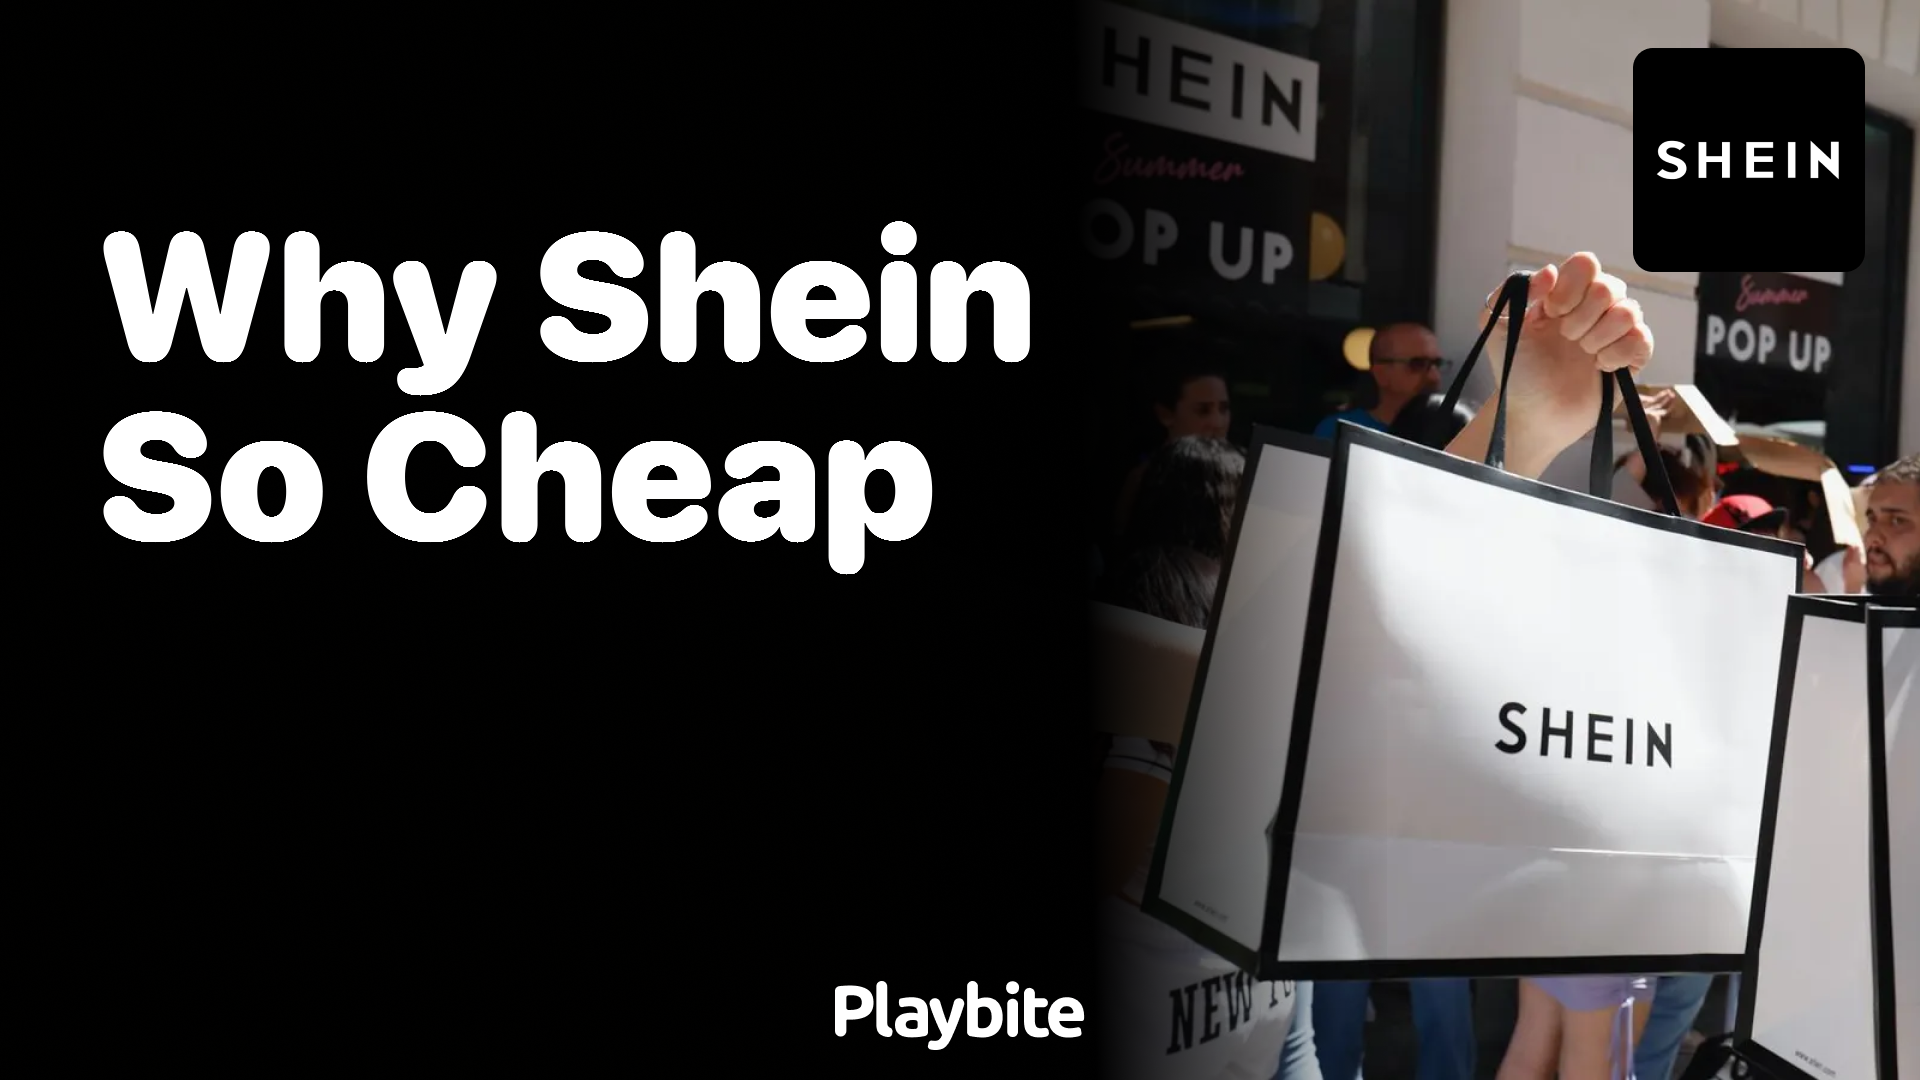 Why is Shein so cheap? Some shoppers want the answer — and so do